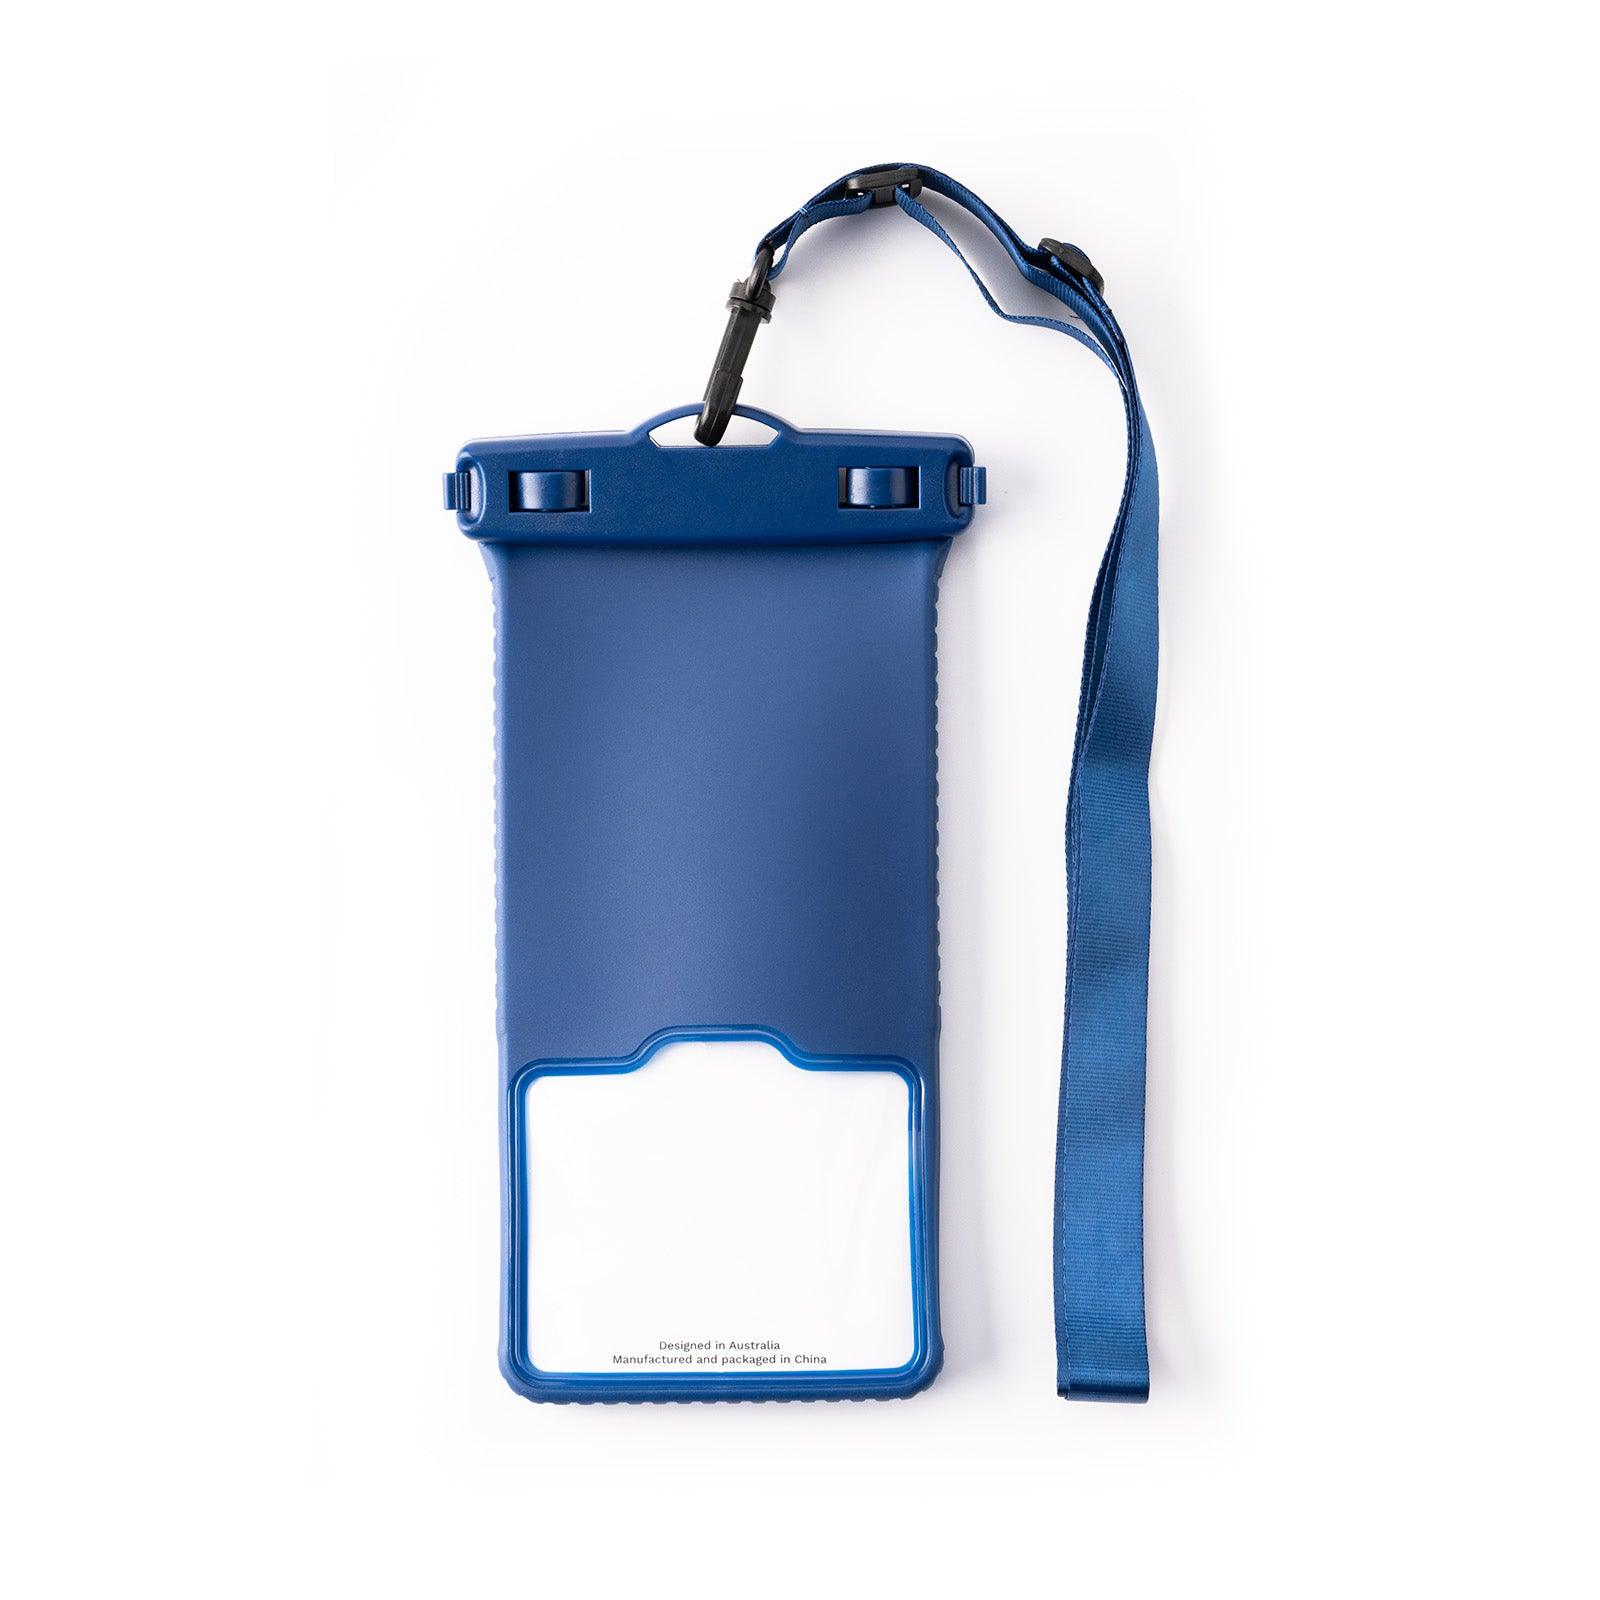 Blue IPX8 Certified Water Proof Bag with Lanyard - CORECOLOUR